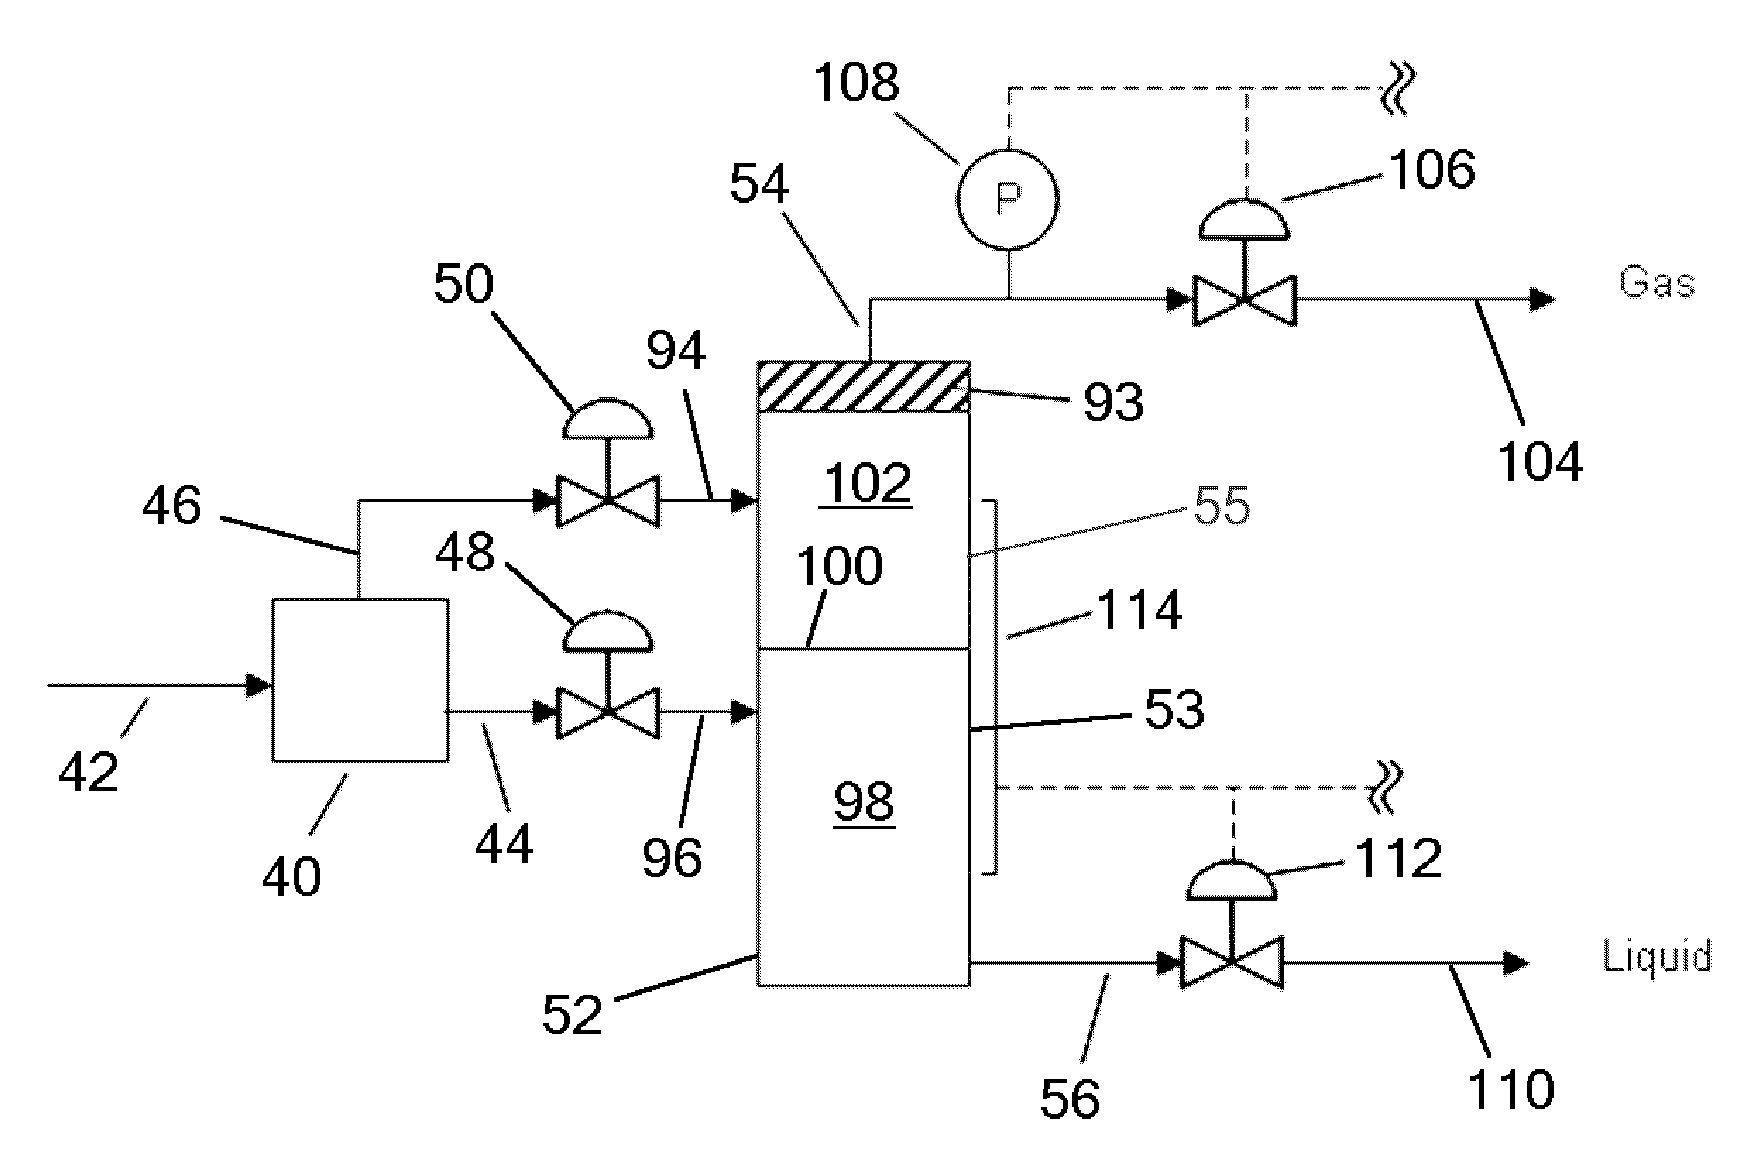 Apparatus for and method of separating multi-phase fluids